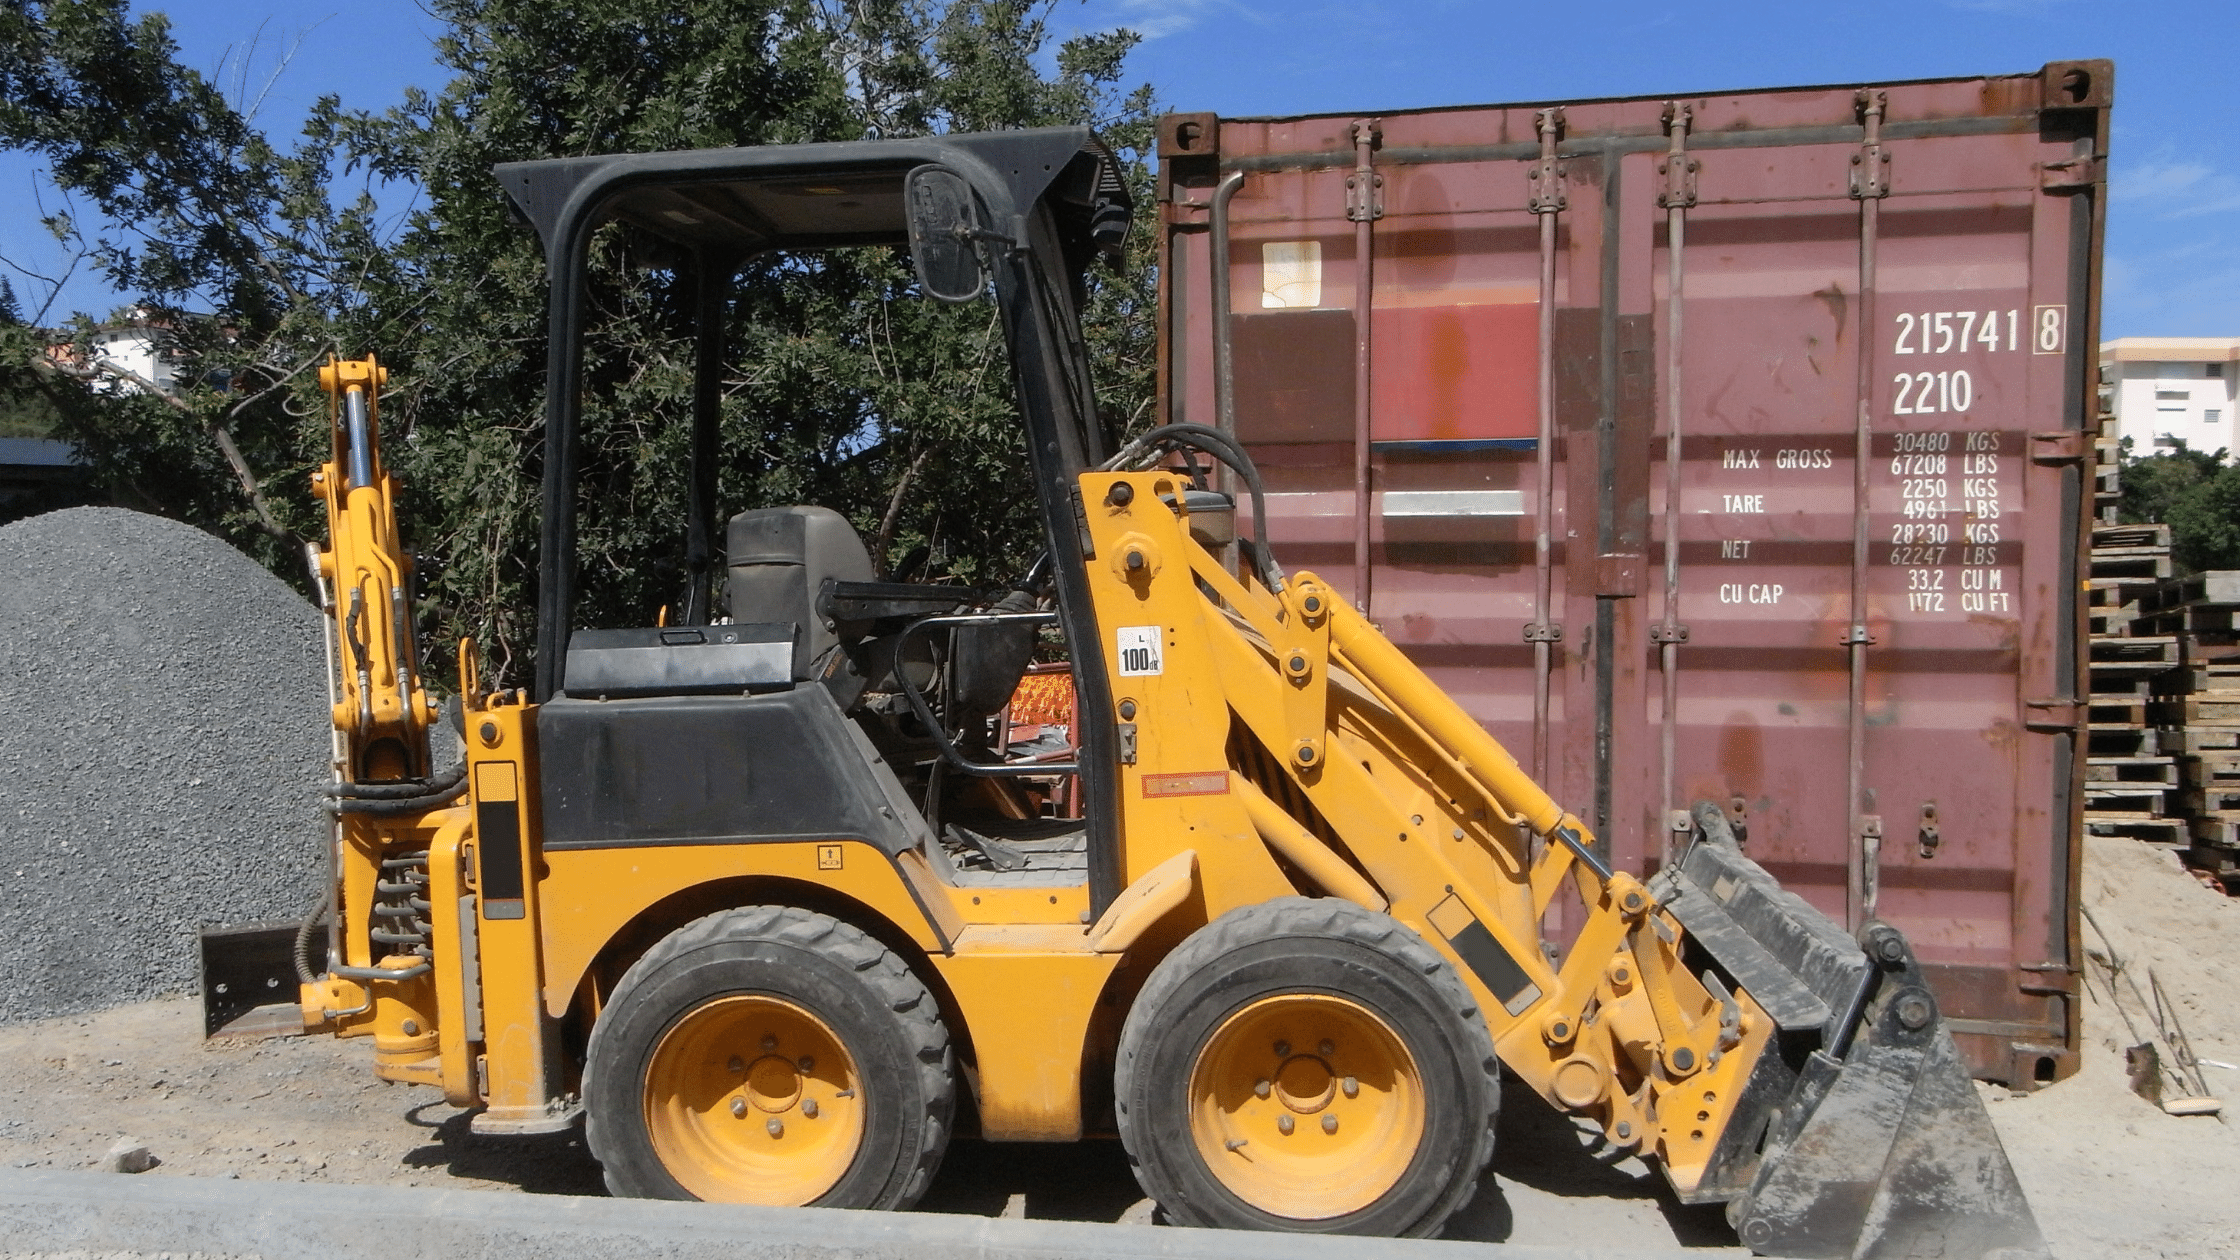 How To Keep Employees Safe While Moving Heavy Equipment